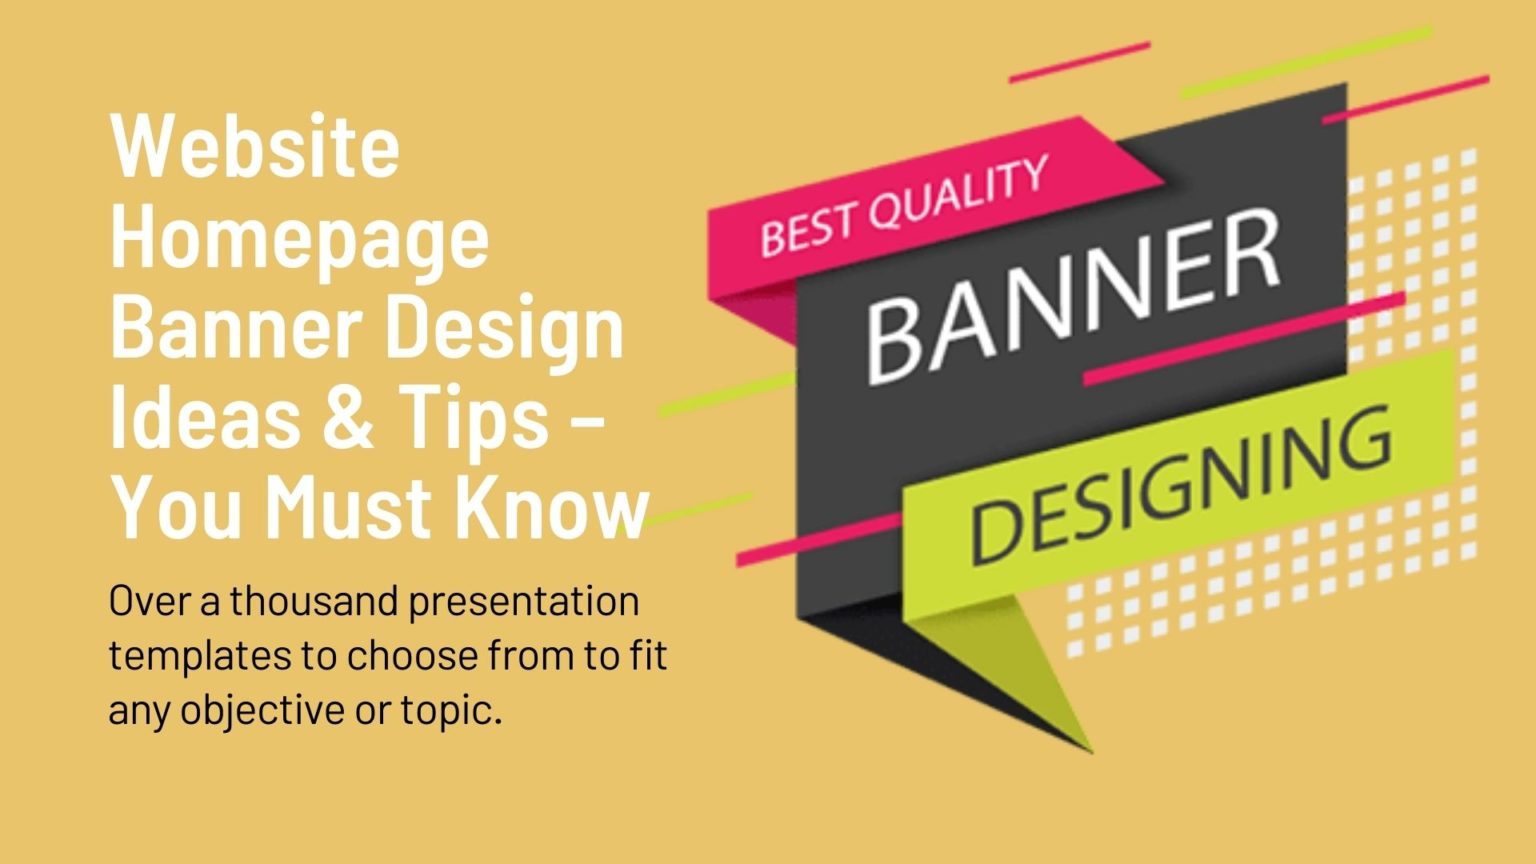 Website-Homepage-Banner-Design-Ideas-Tips-You-Must-Know